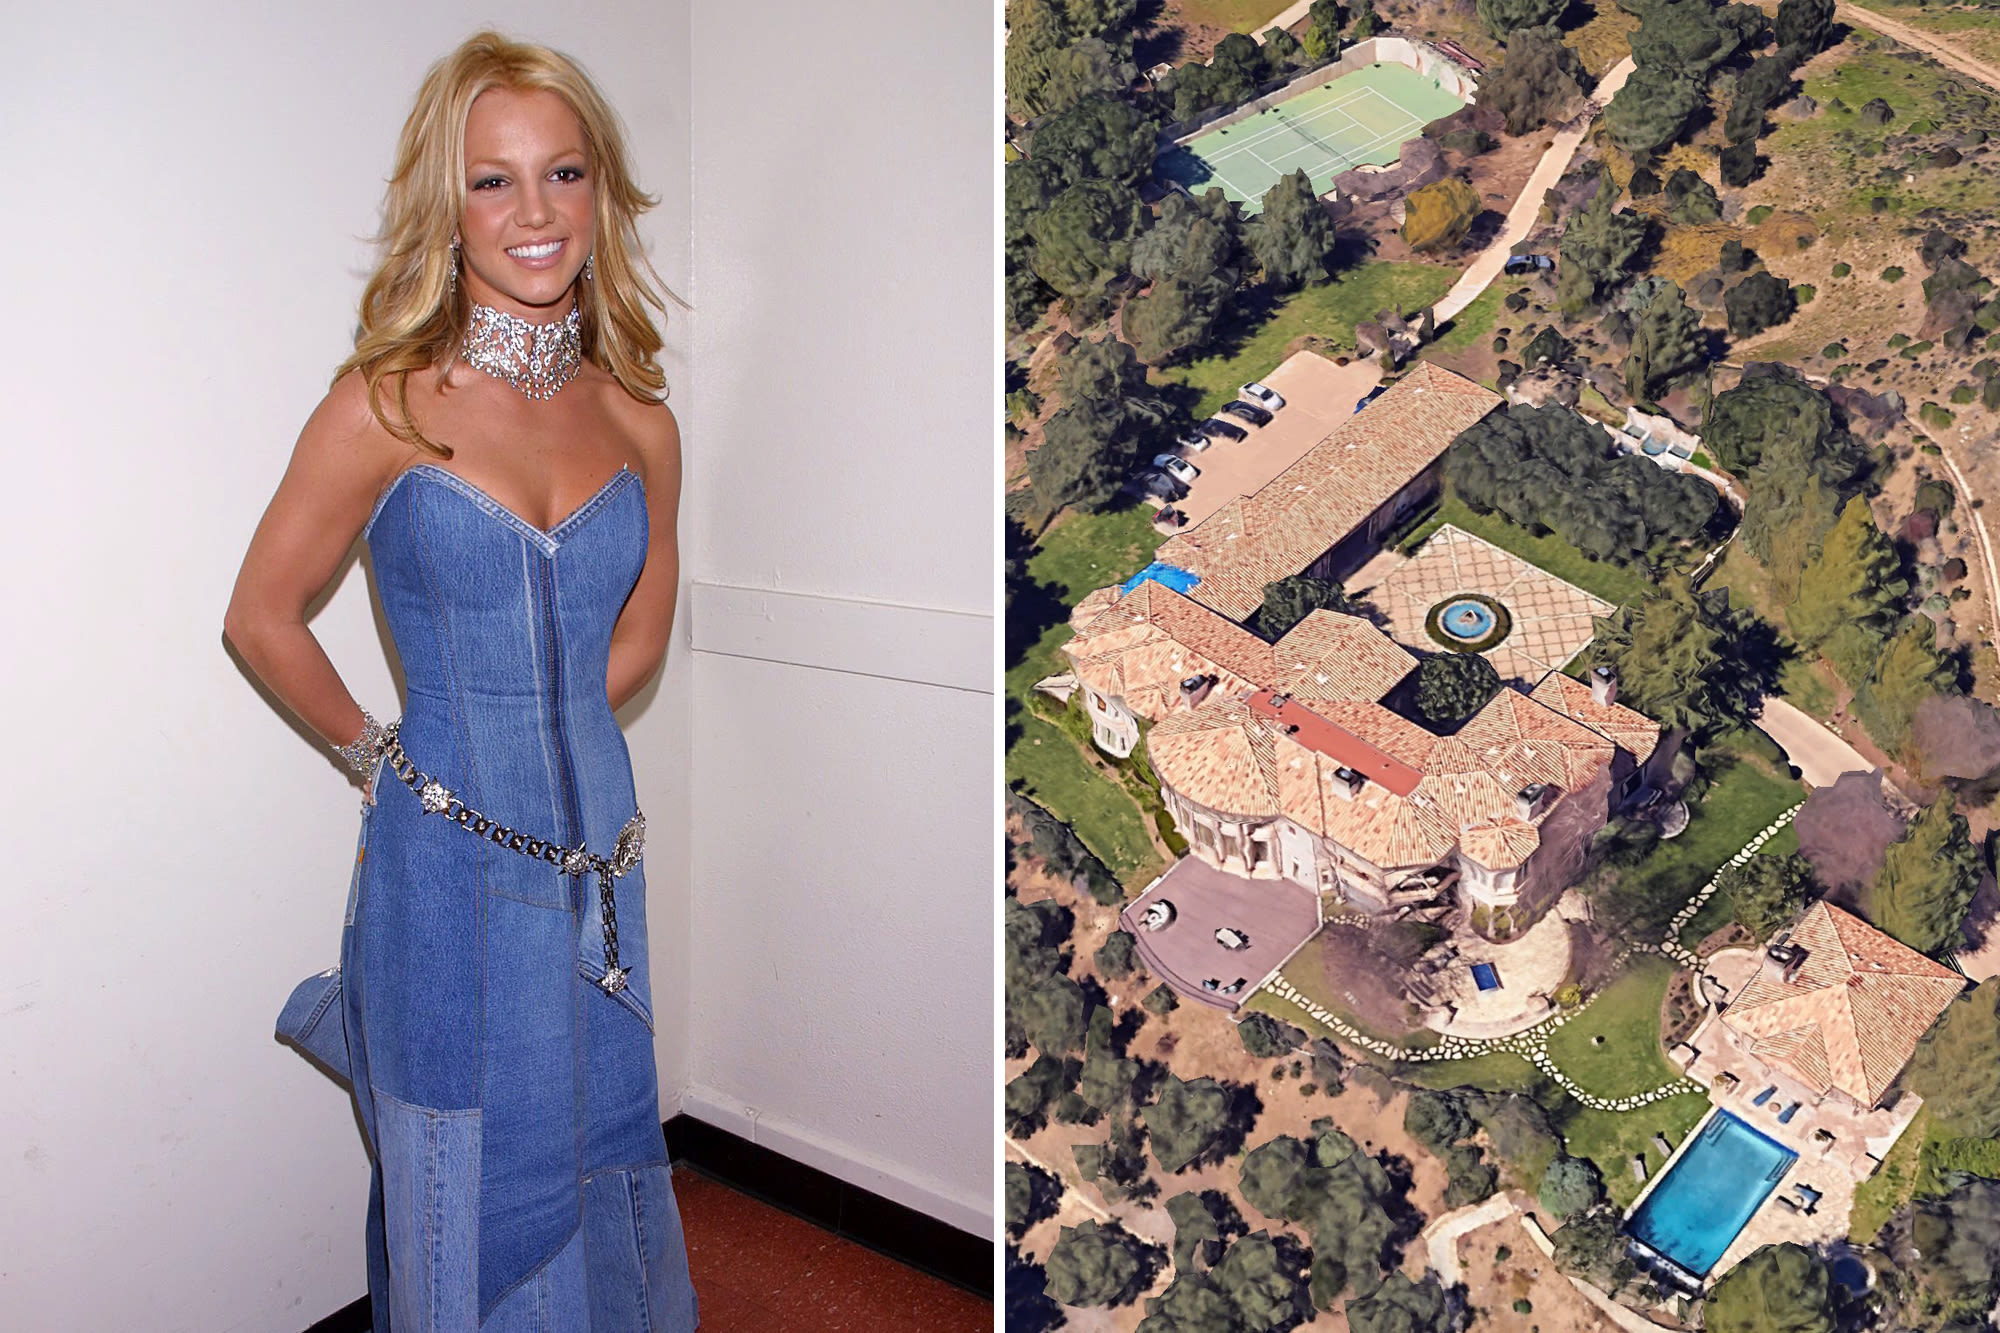 Britney Spears’ LA mansion was listed for sale — without her knowledge